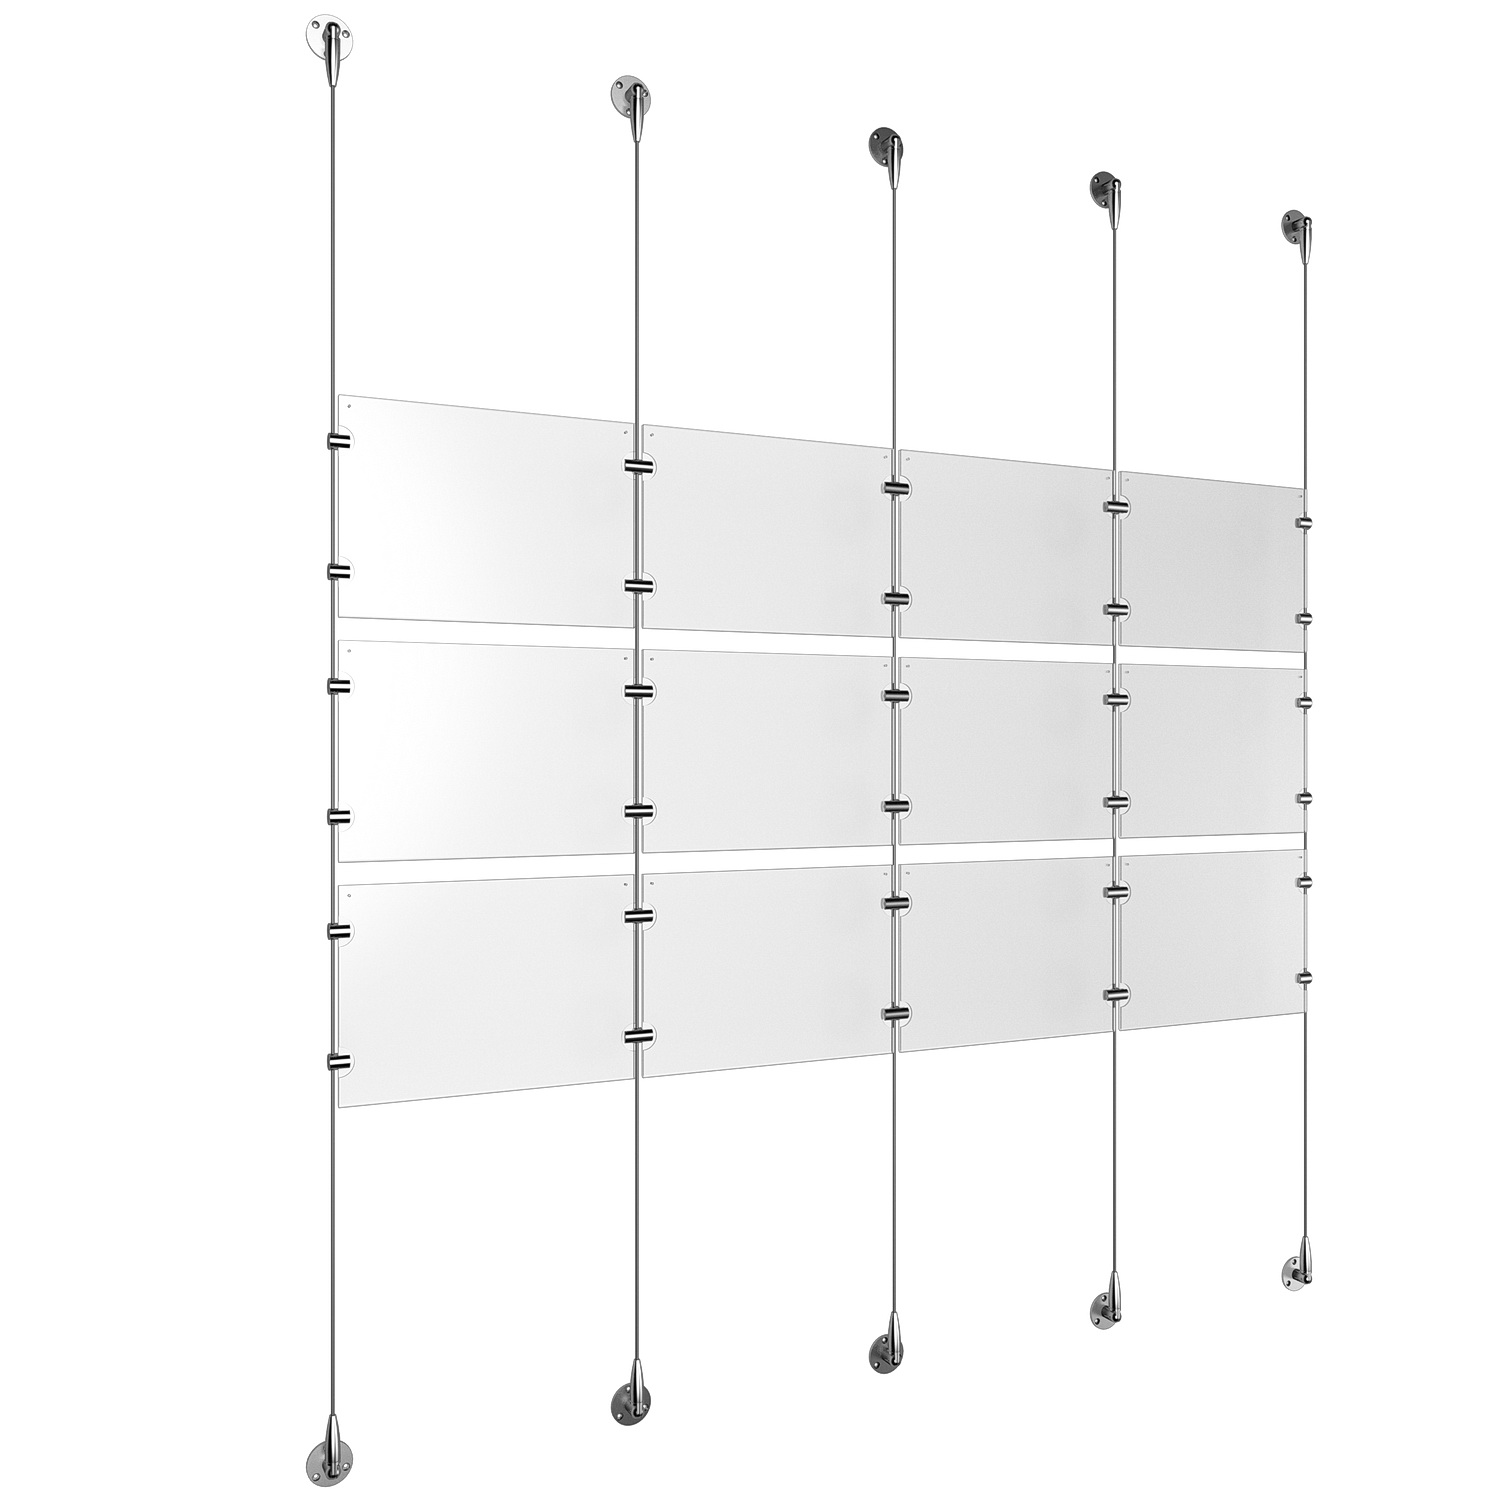 (12) 11'' Width x 8-1/2'' Height Clear Acrylic Frame & (5) Stainless Steel Satin Brushed Adjustable Angle Signature 1/8'' Cable Systems with (12) Single-Sided Panel Grippers (18) Double-Sided Panel Grippers